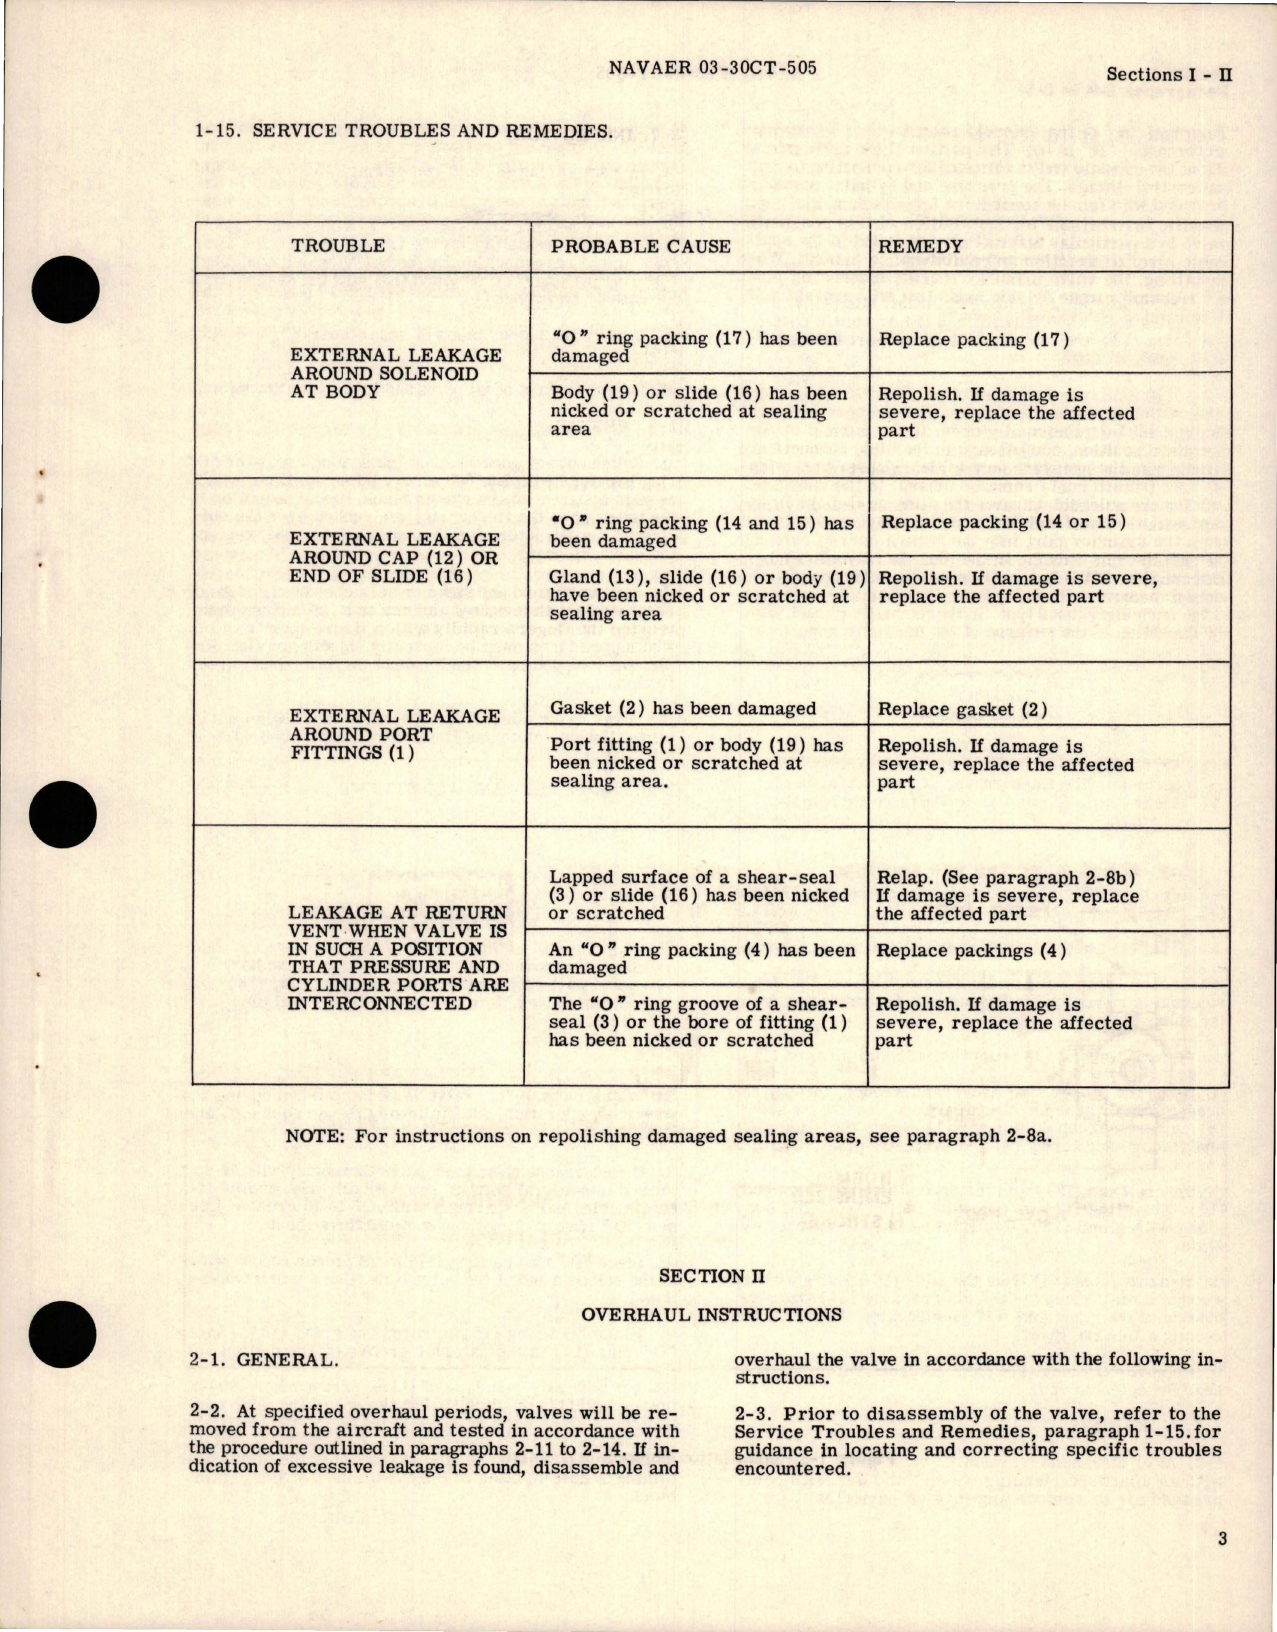 Sample page 5 from AirCorps Library document: Operation, Service, and Overhaul Instructions with Parts for Solenoid Operated Three-Way Air Valve - Models 4804-1, 4804-2